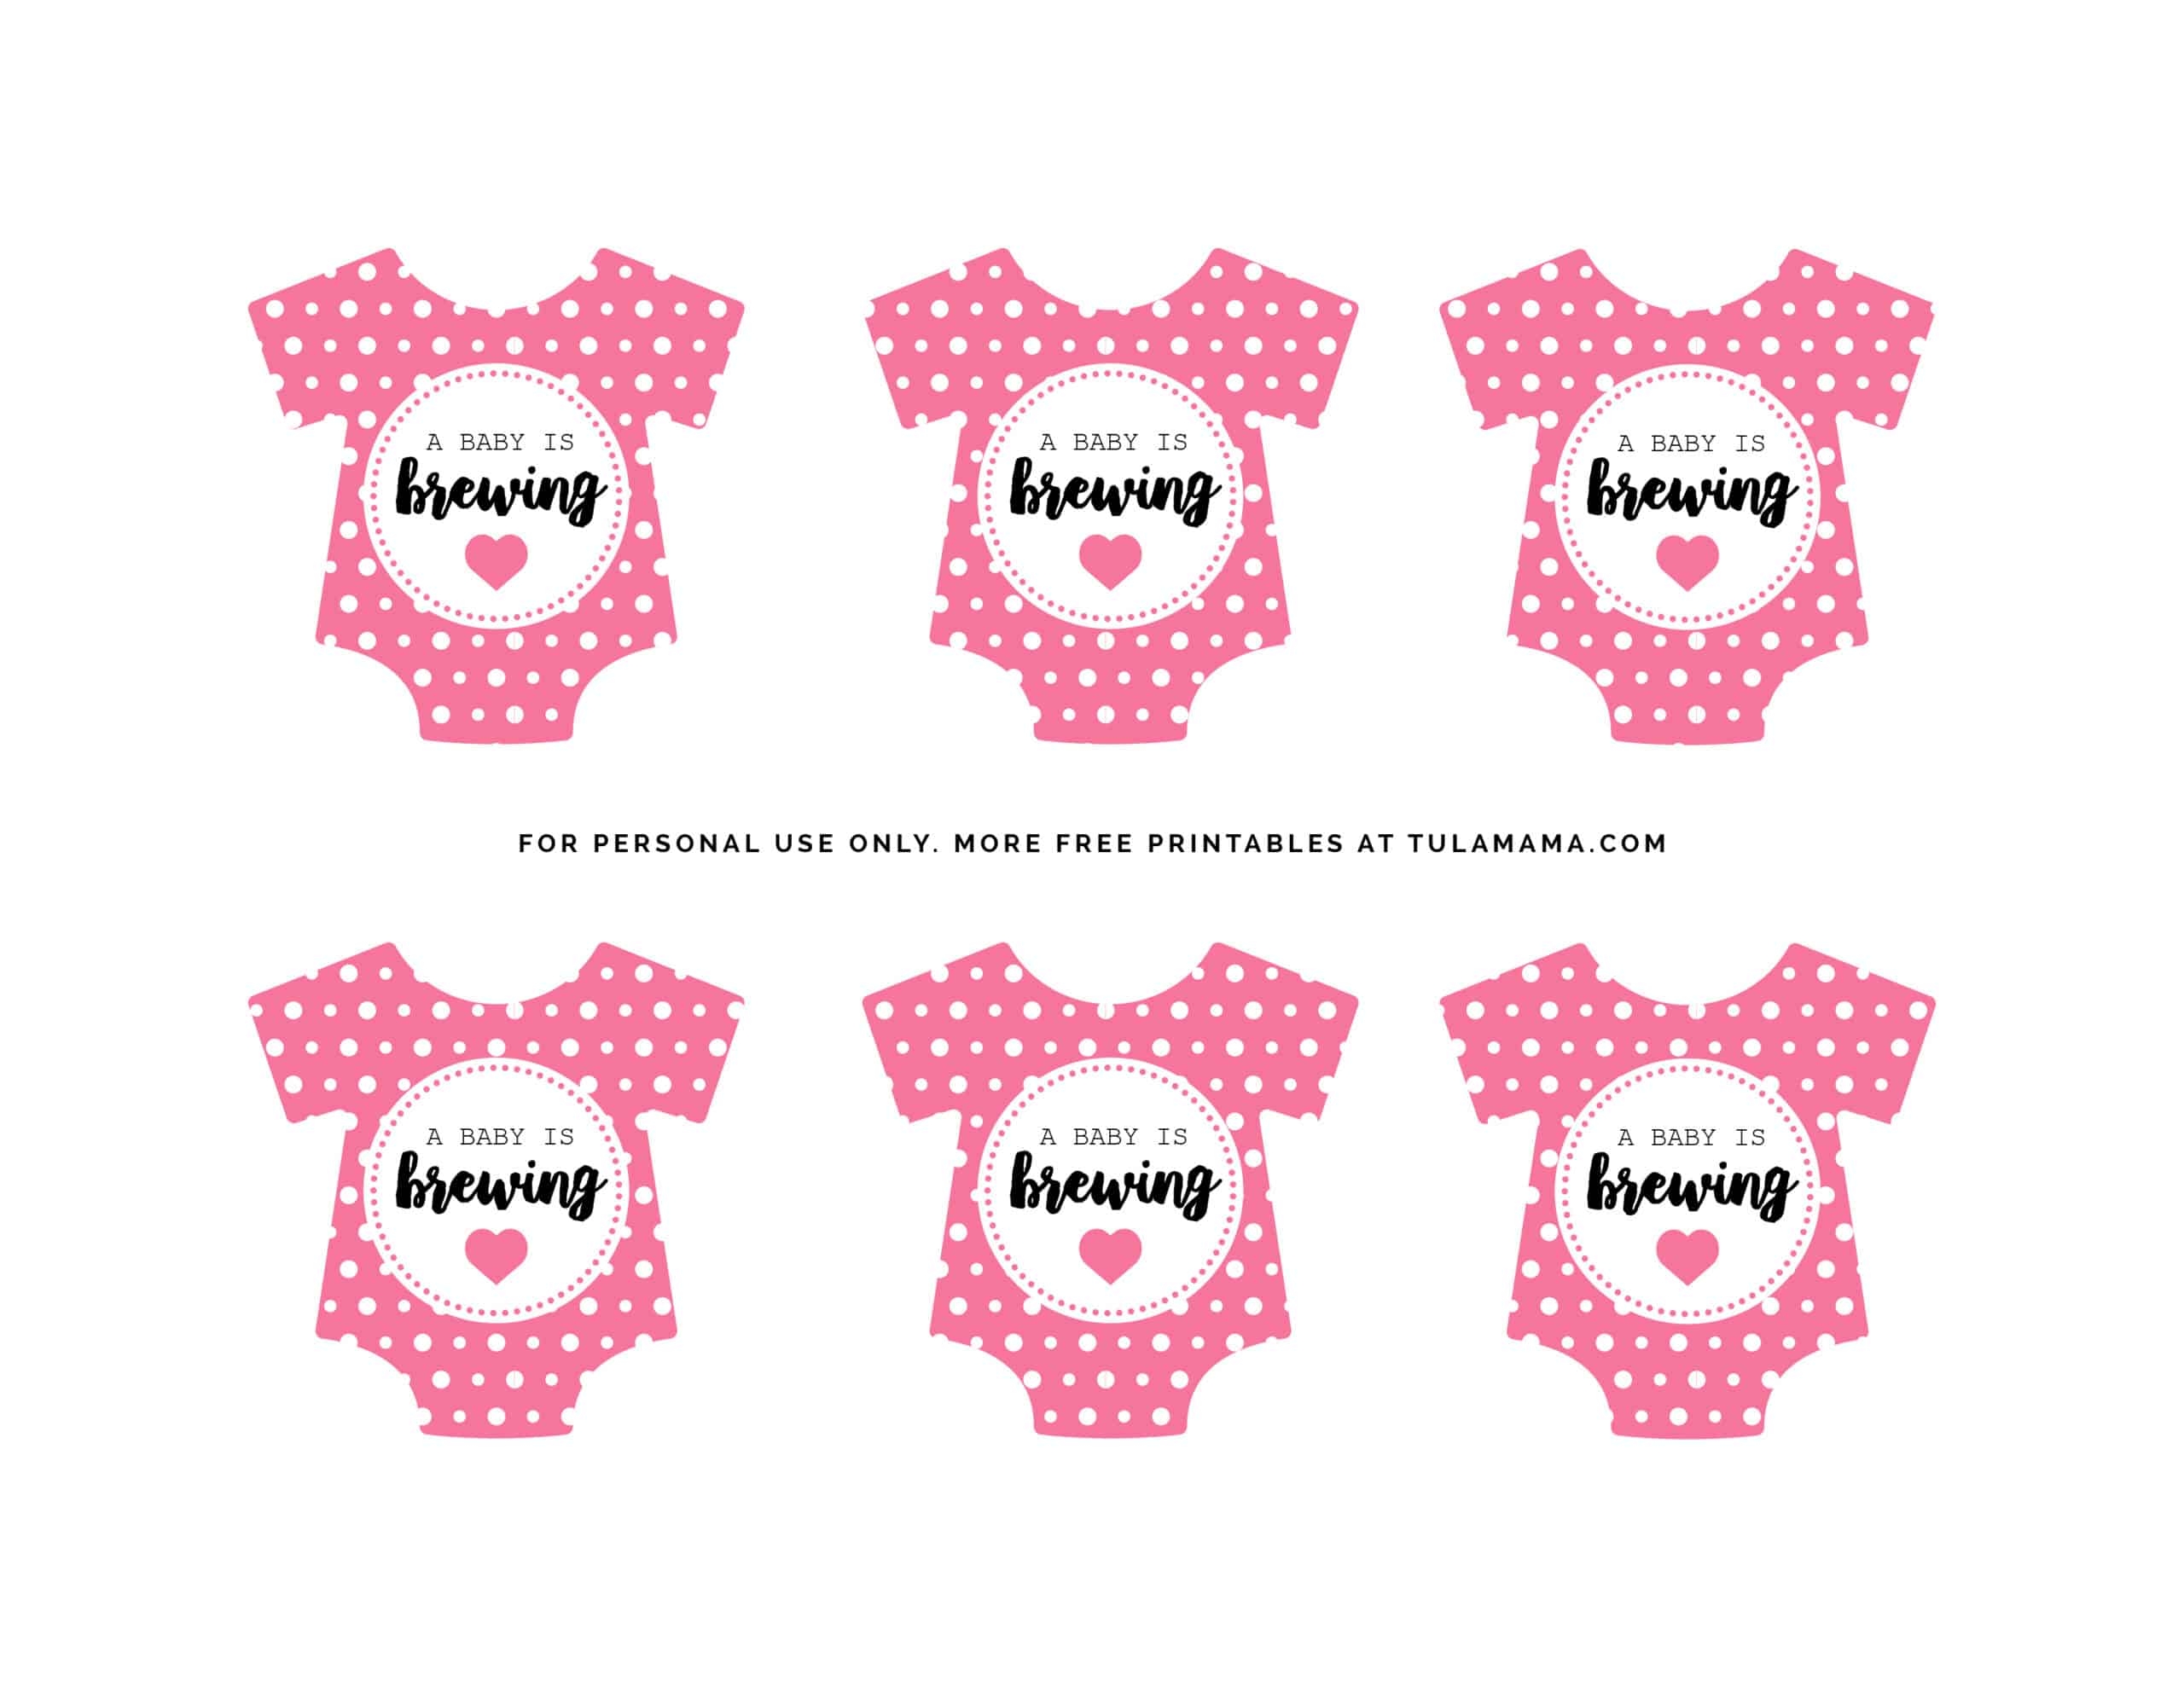 Free A Baby Is Brewing Baby Shower Printables Tulamama - Free Printable Baby Shower Favor Tags Template